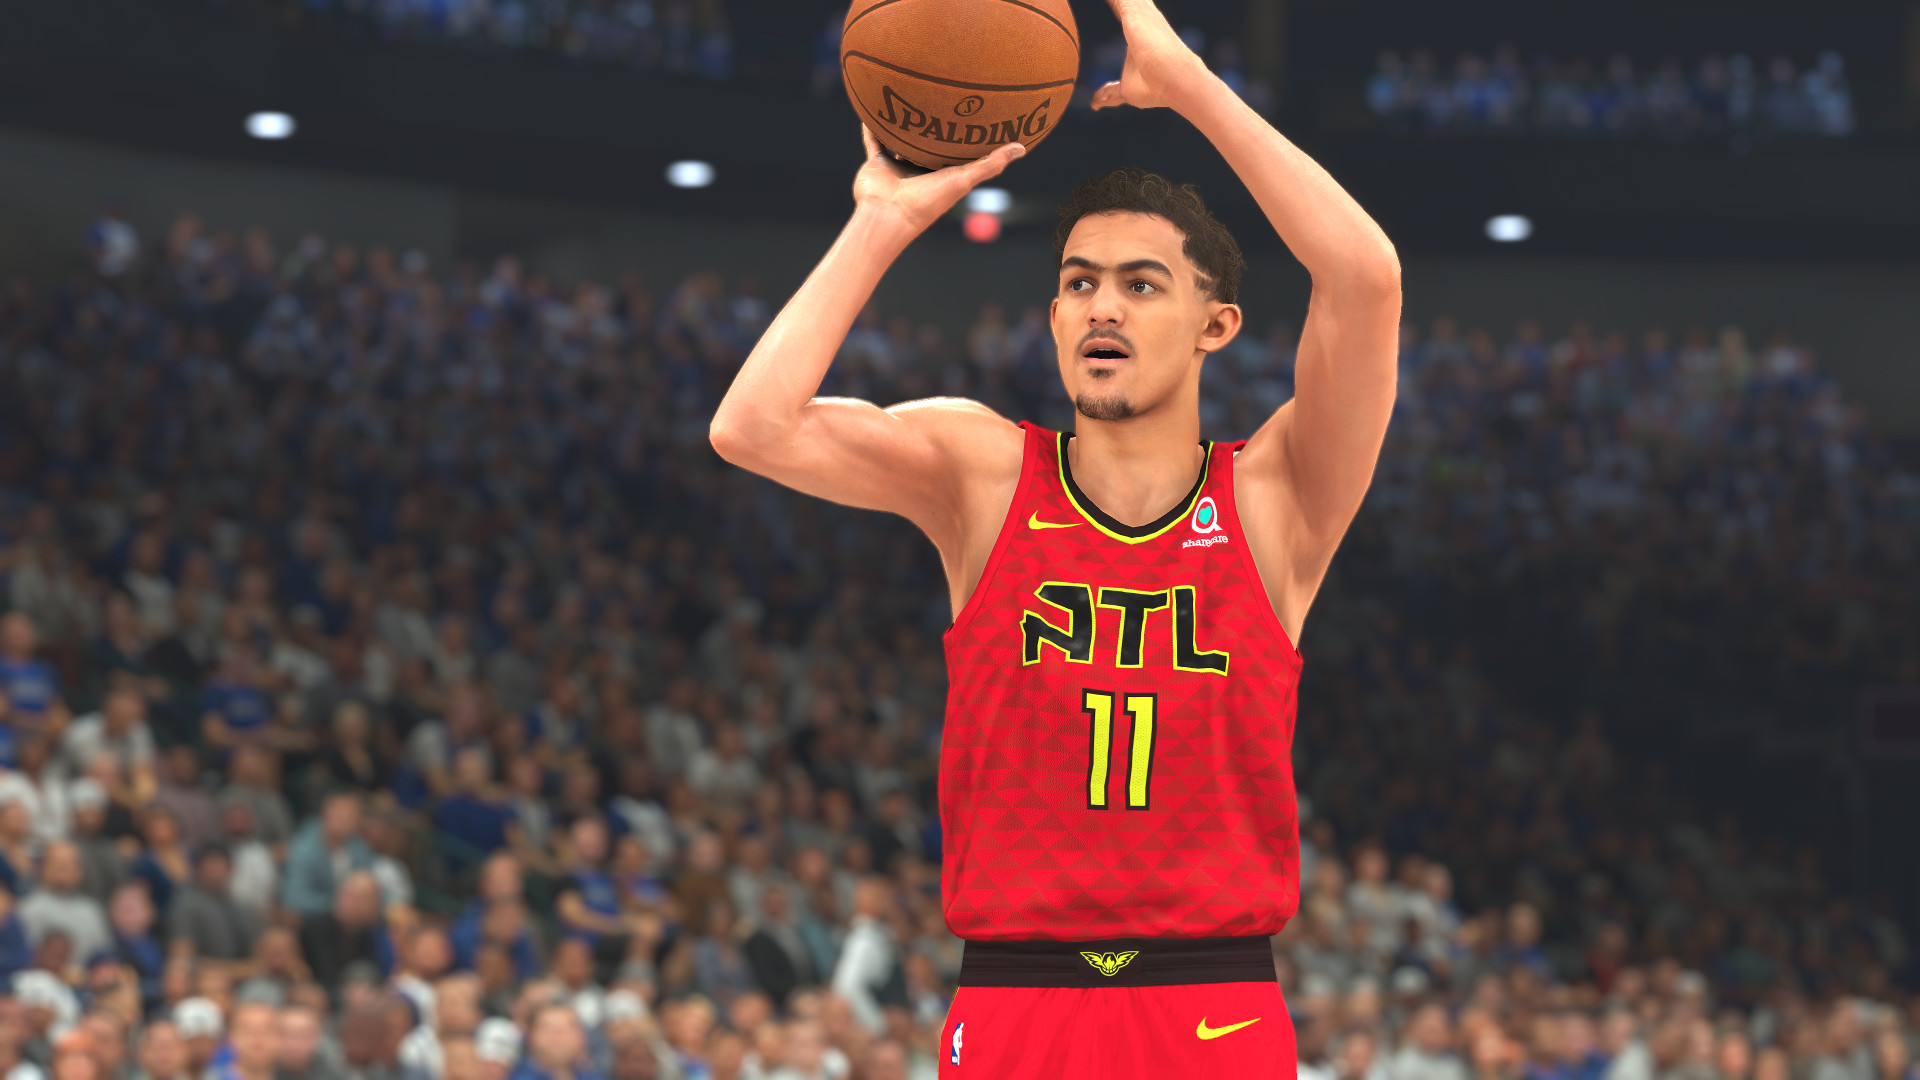 Trae young rating 2k20